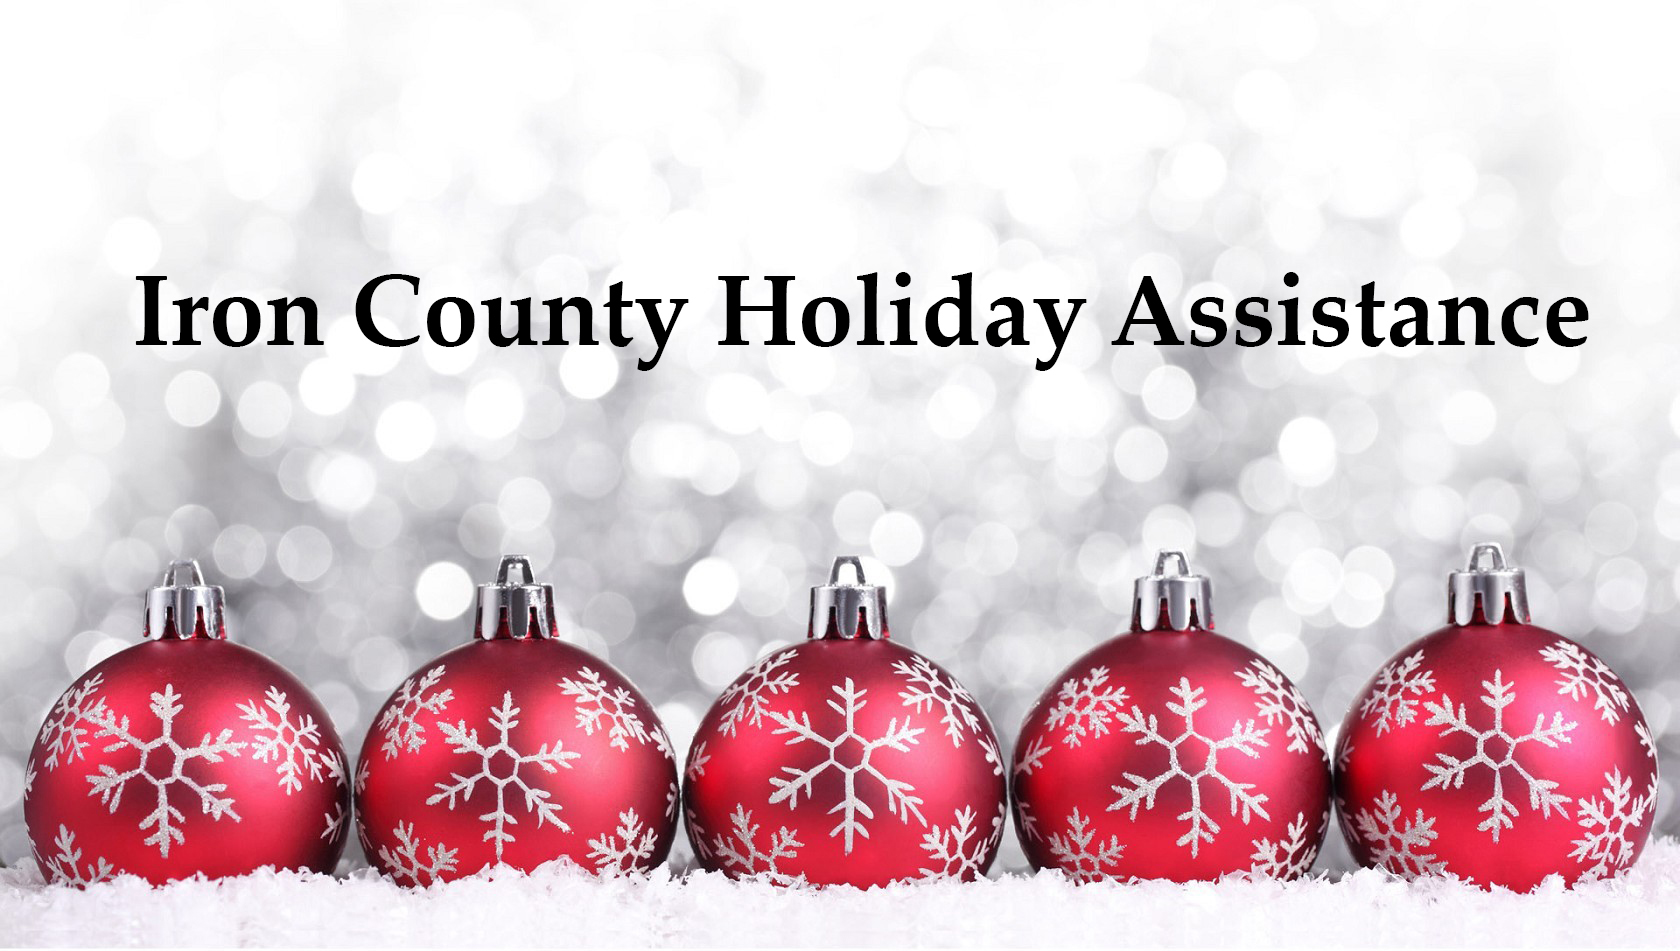 Iron County Holiday Assistance